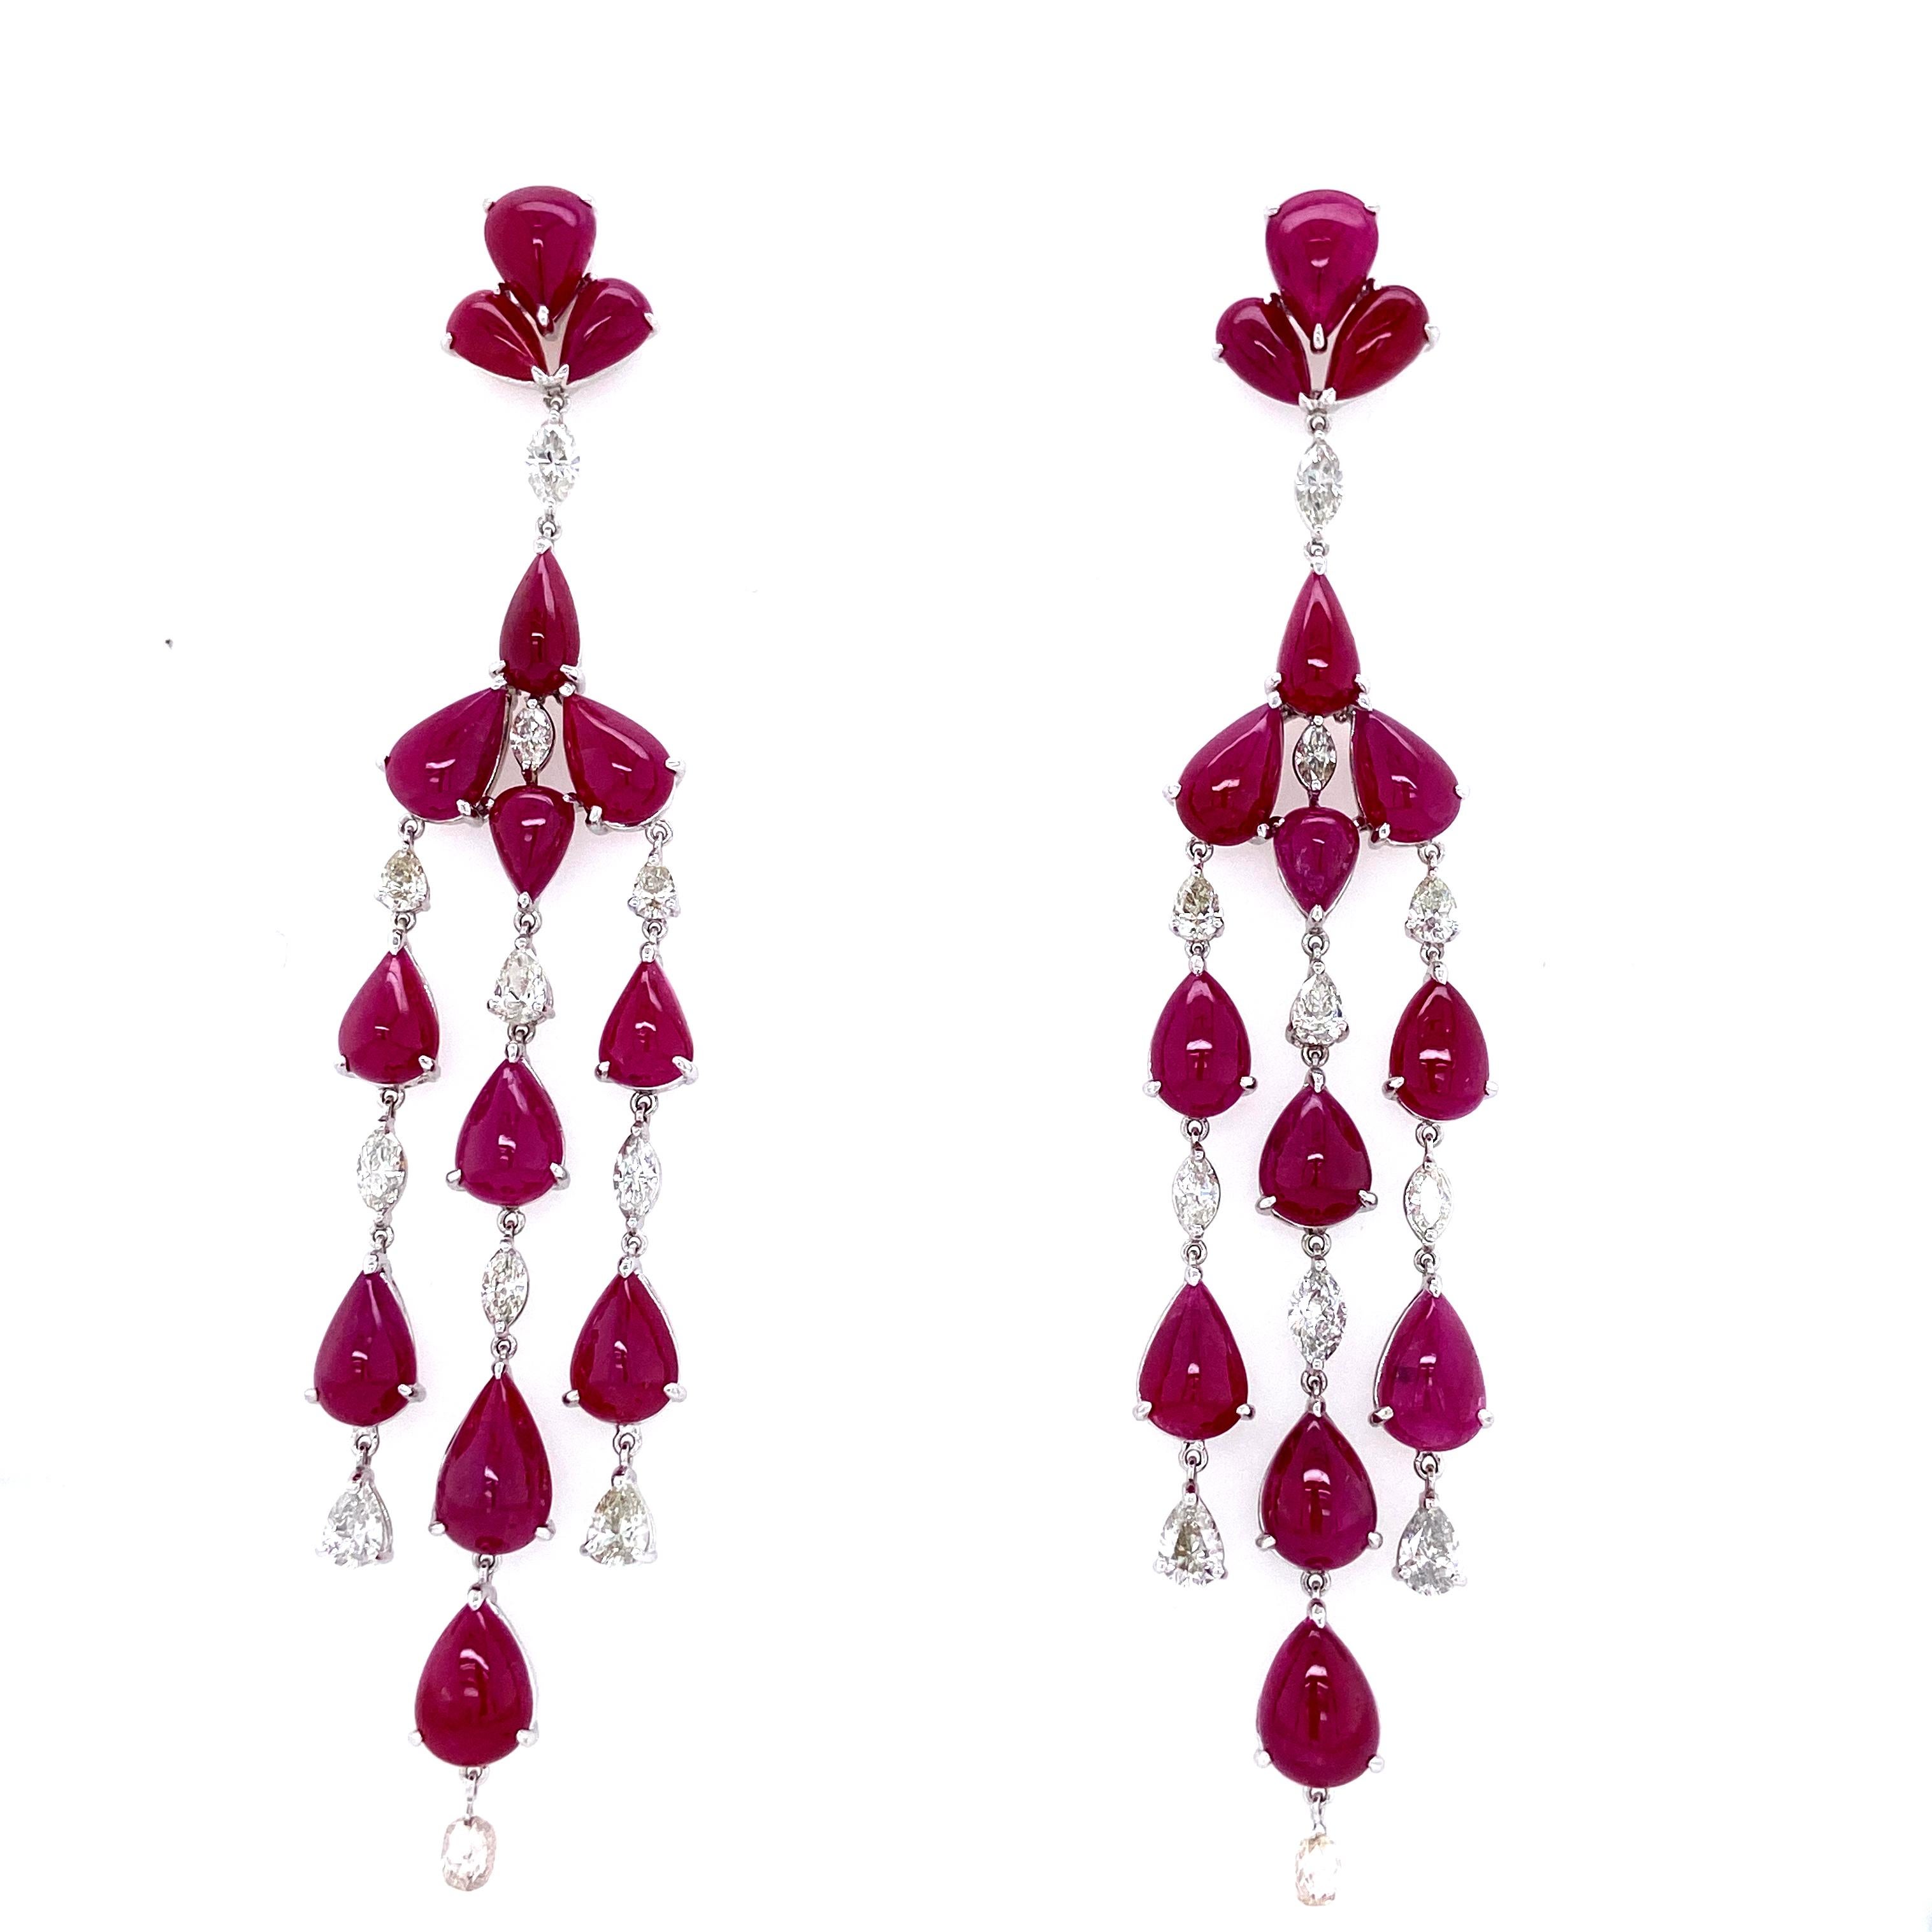 78.50 Carat Natural Ruby Cabochons and White Diamond Gold Chandelier Earrings:

A beautiful chandelier earring, it comprises of natural ruby cabochons weighing 78.50 carat, accented by white diamonds weighing 6.71 carat. The rubies are of intense